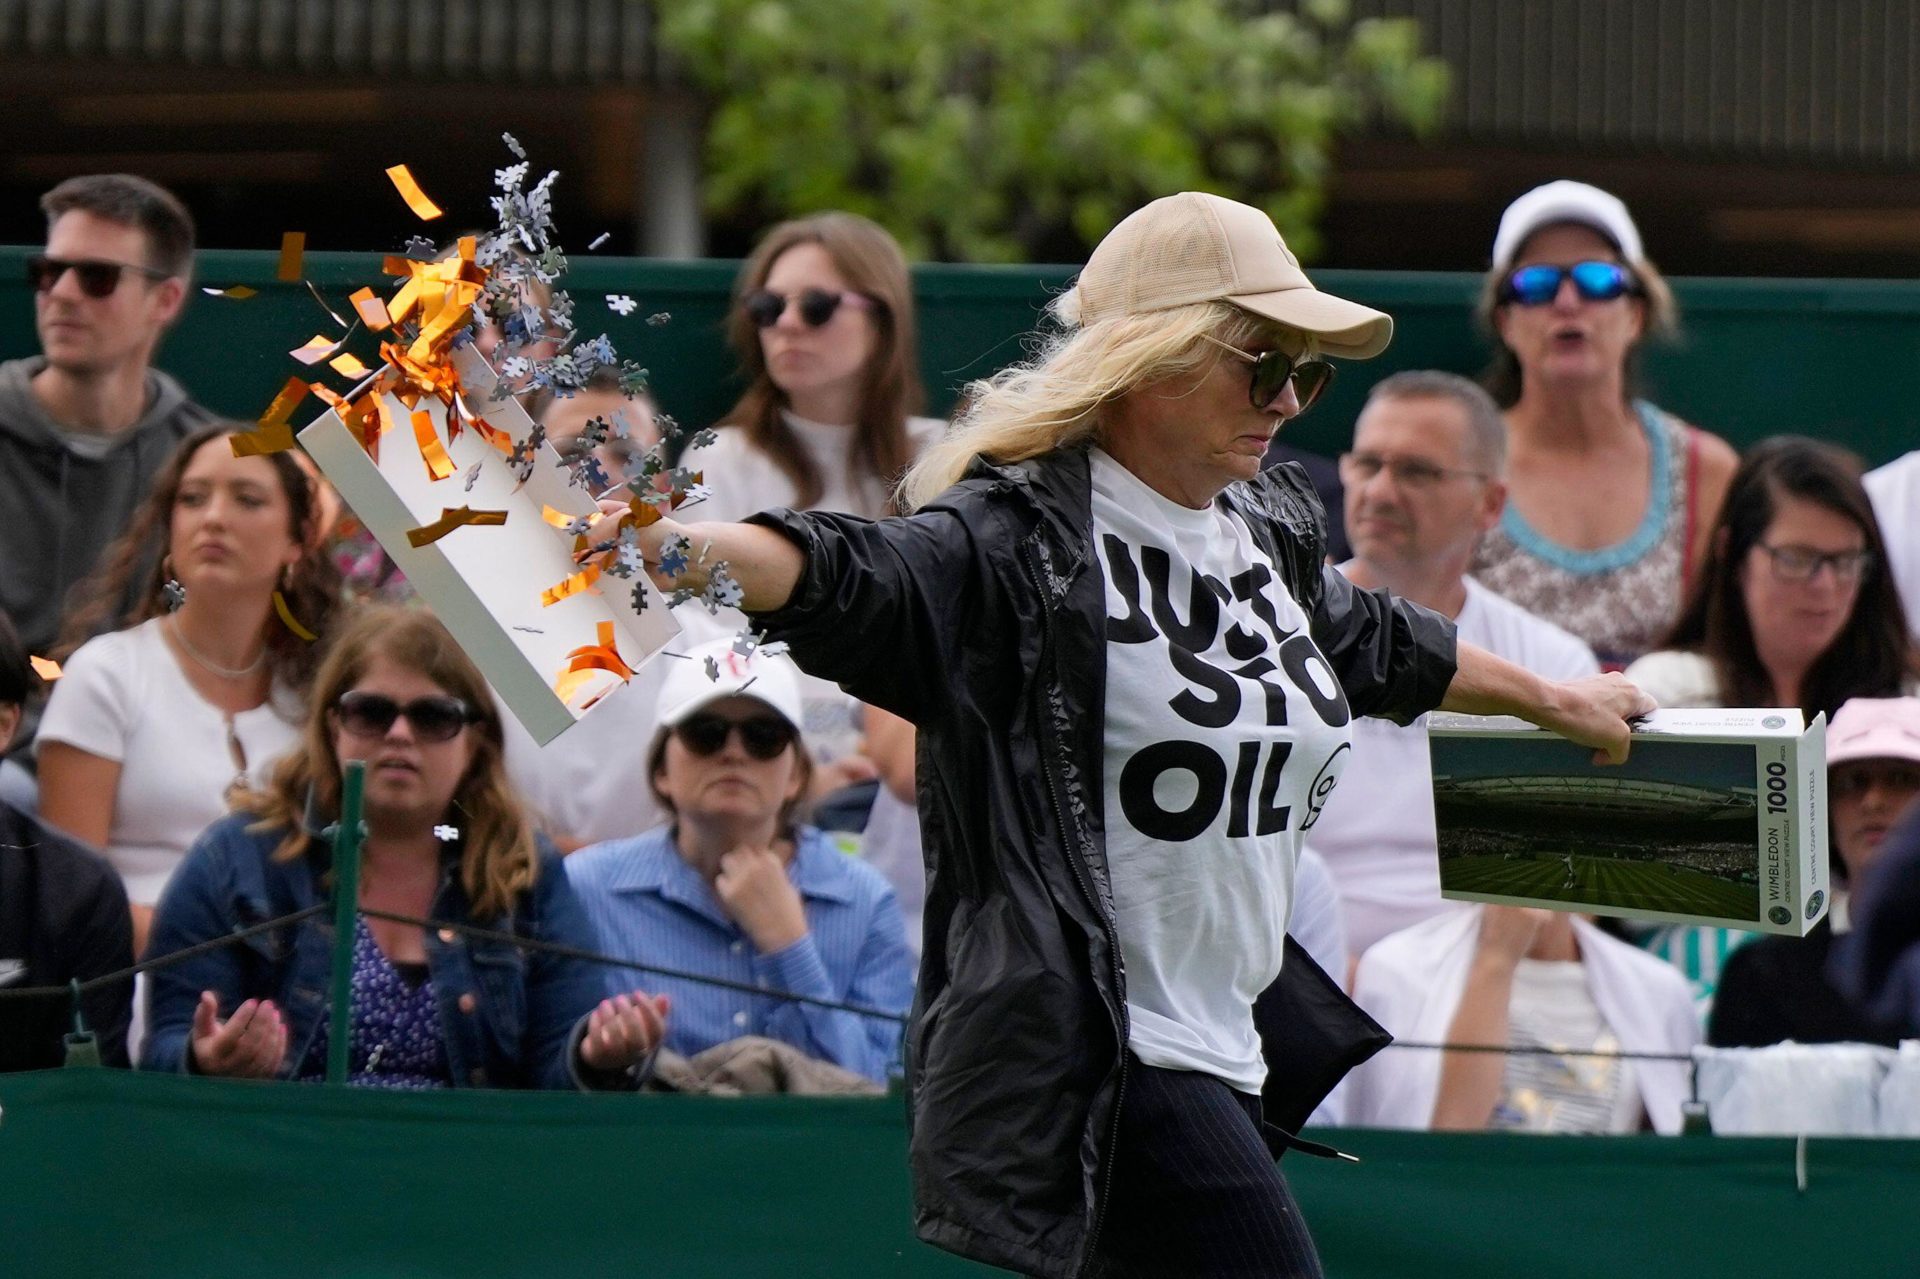 A Just Stop Oil protester runs onto Court 18 at the Wimbledon tennis championships in London, England and releases confetti